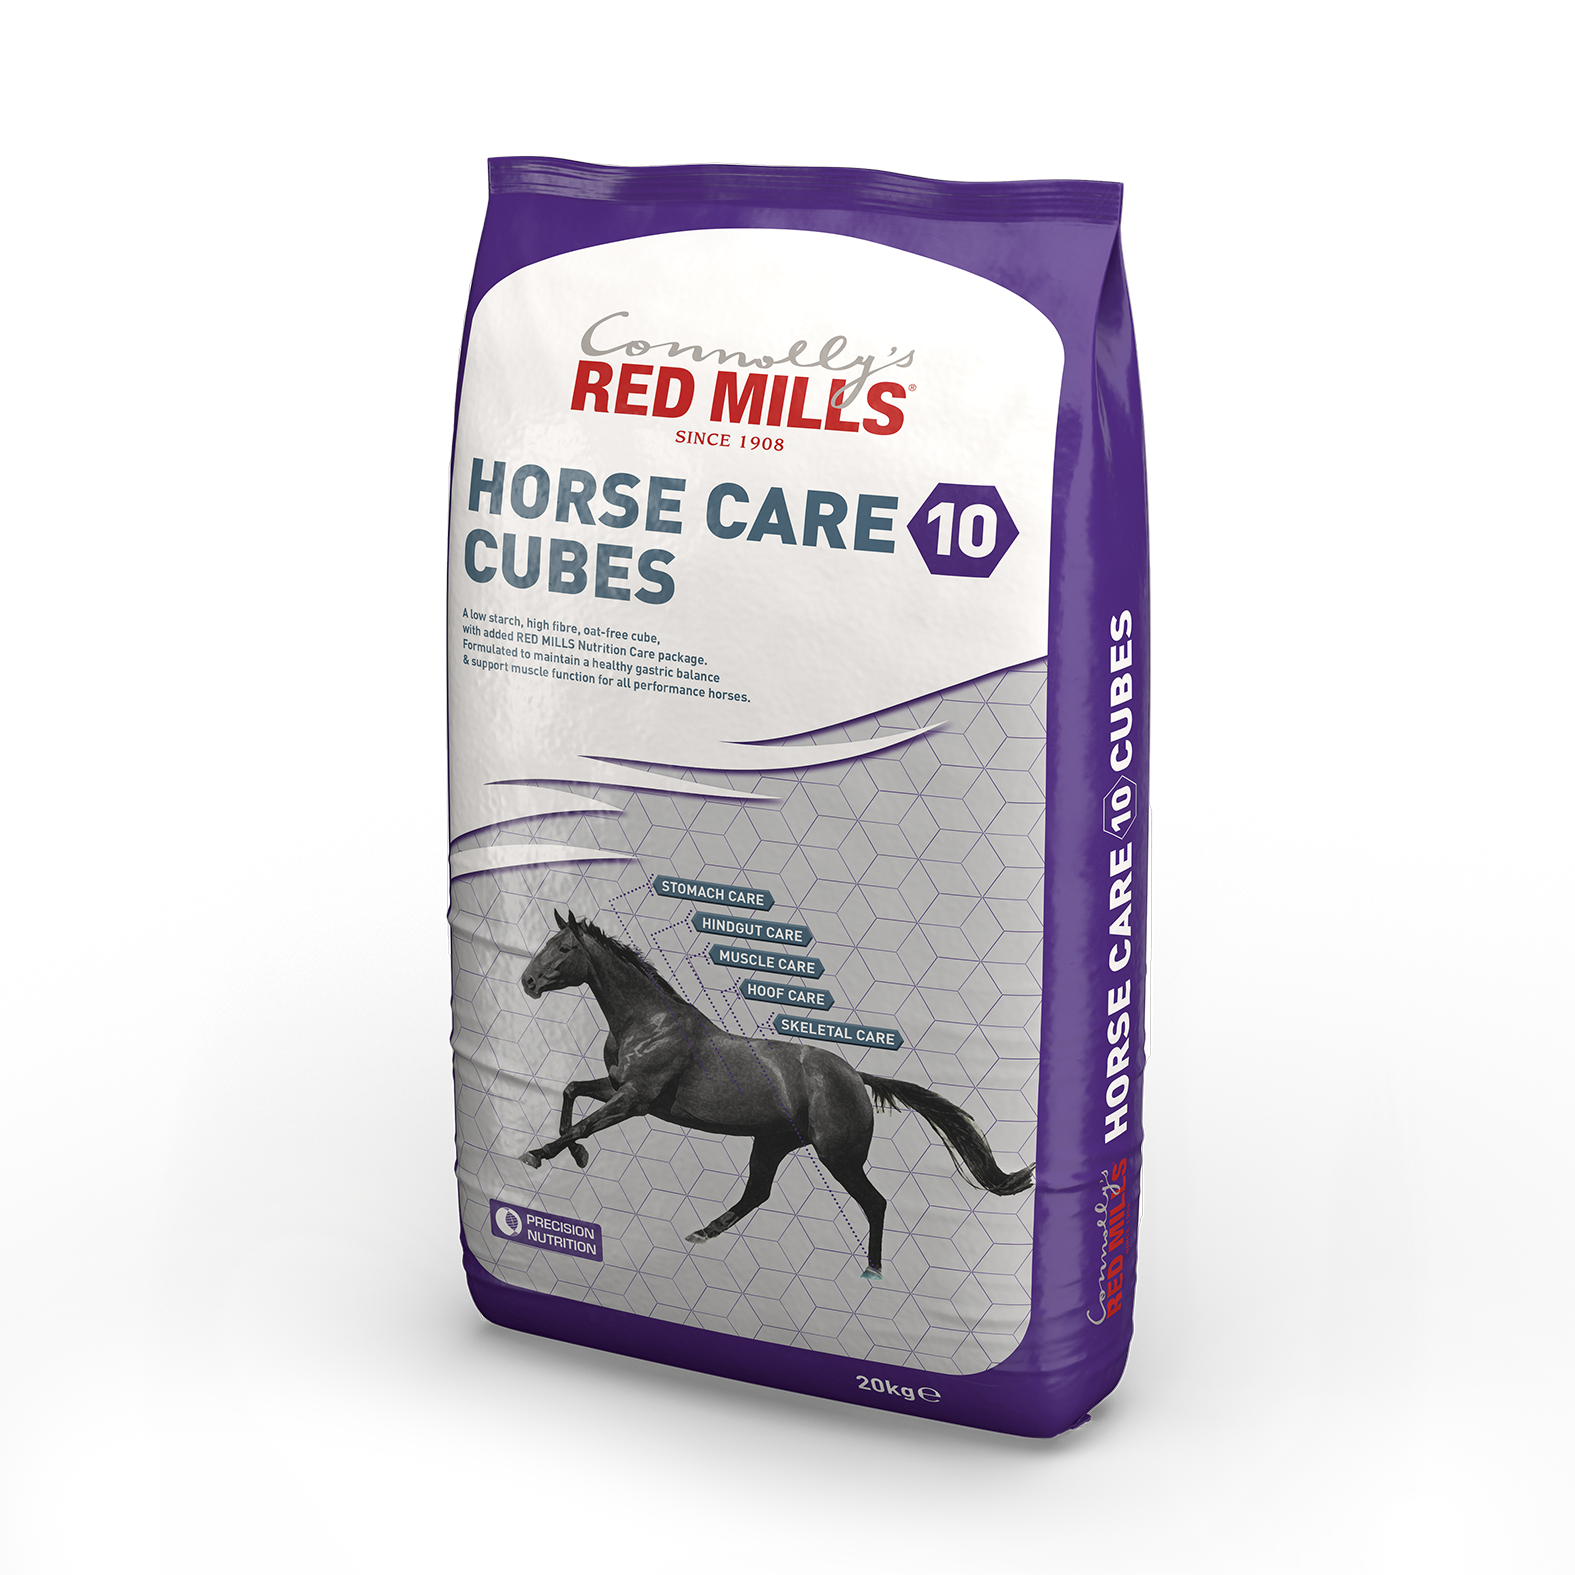 RED MILLS Horse Care 10 Cubes